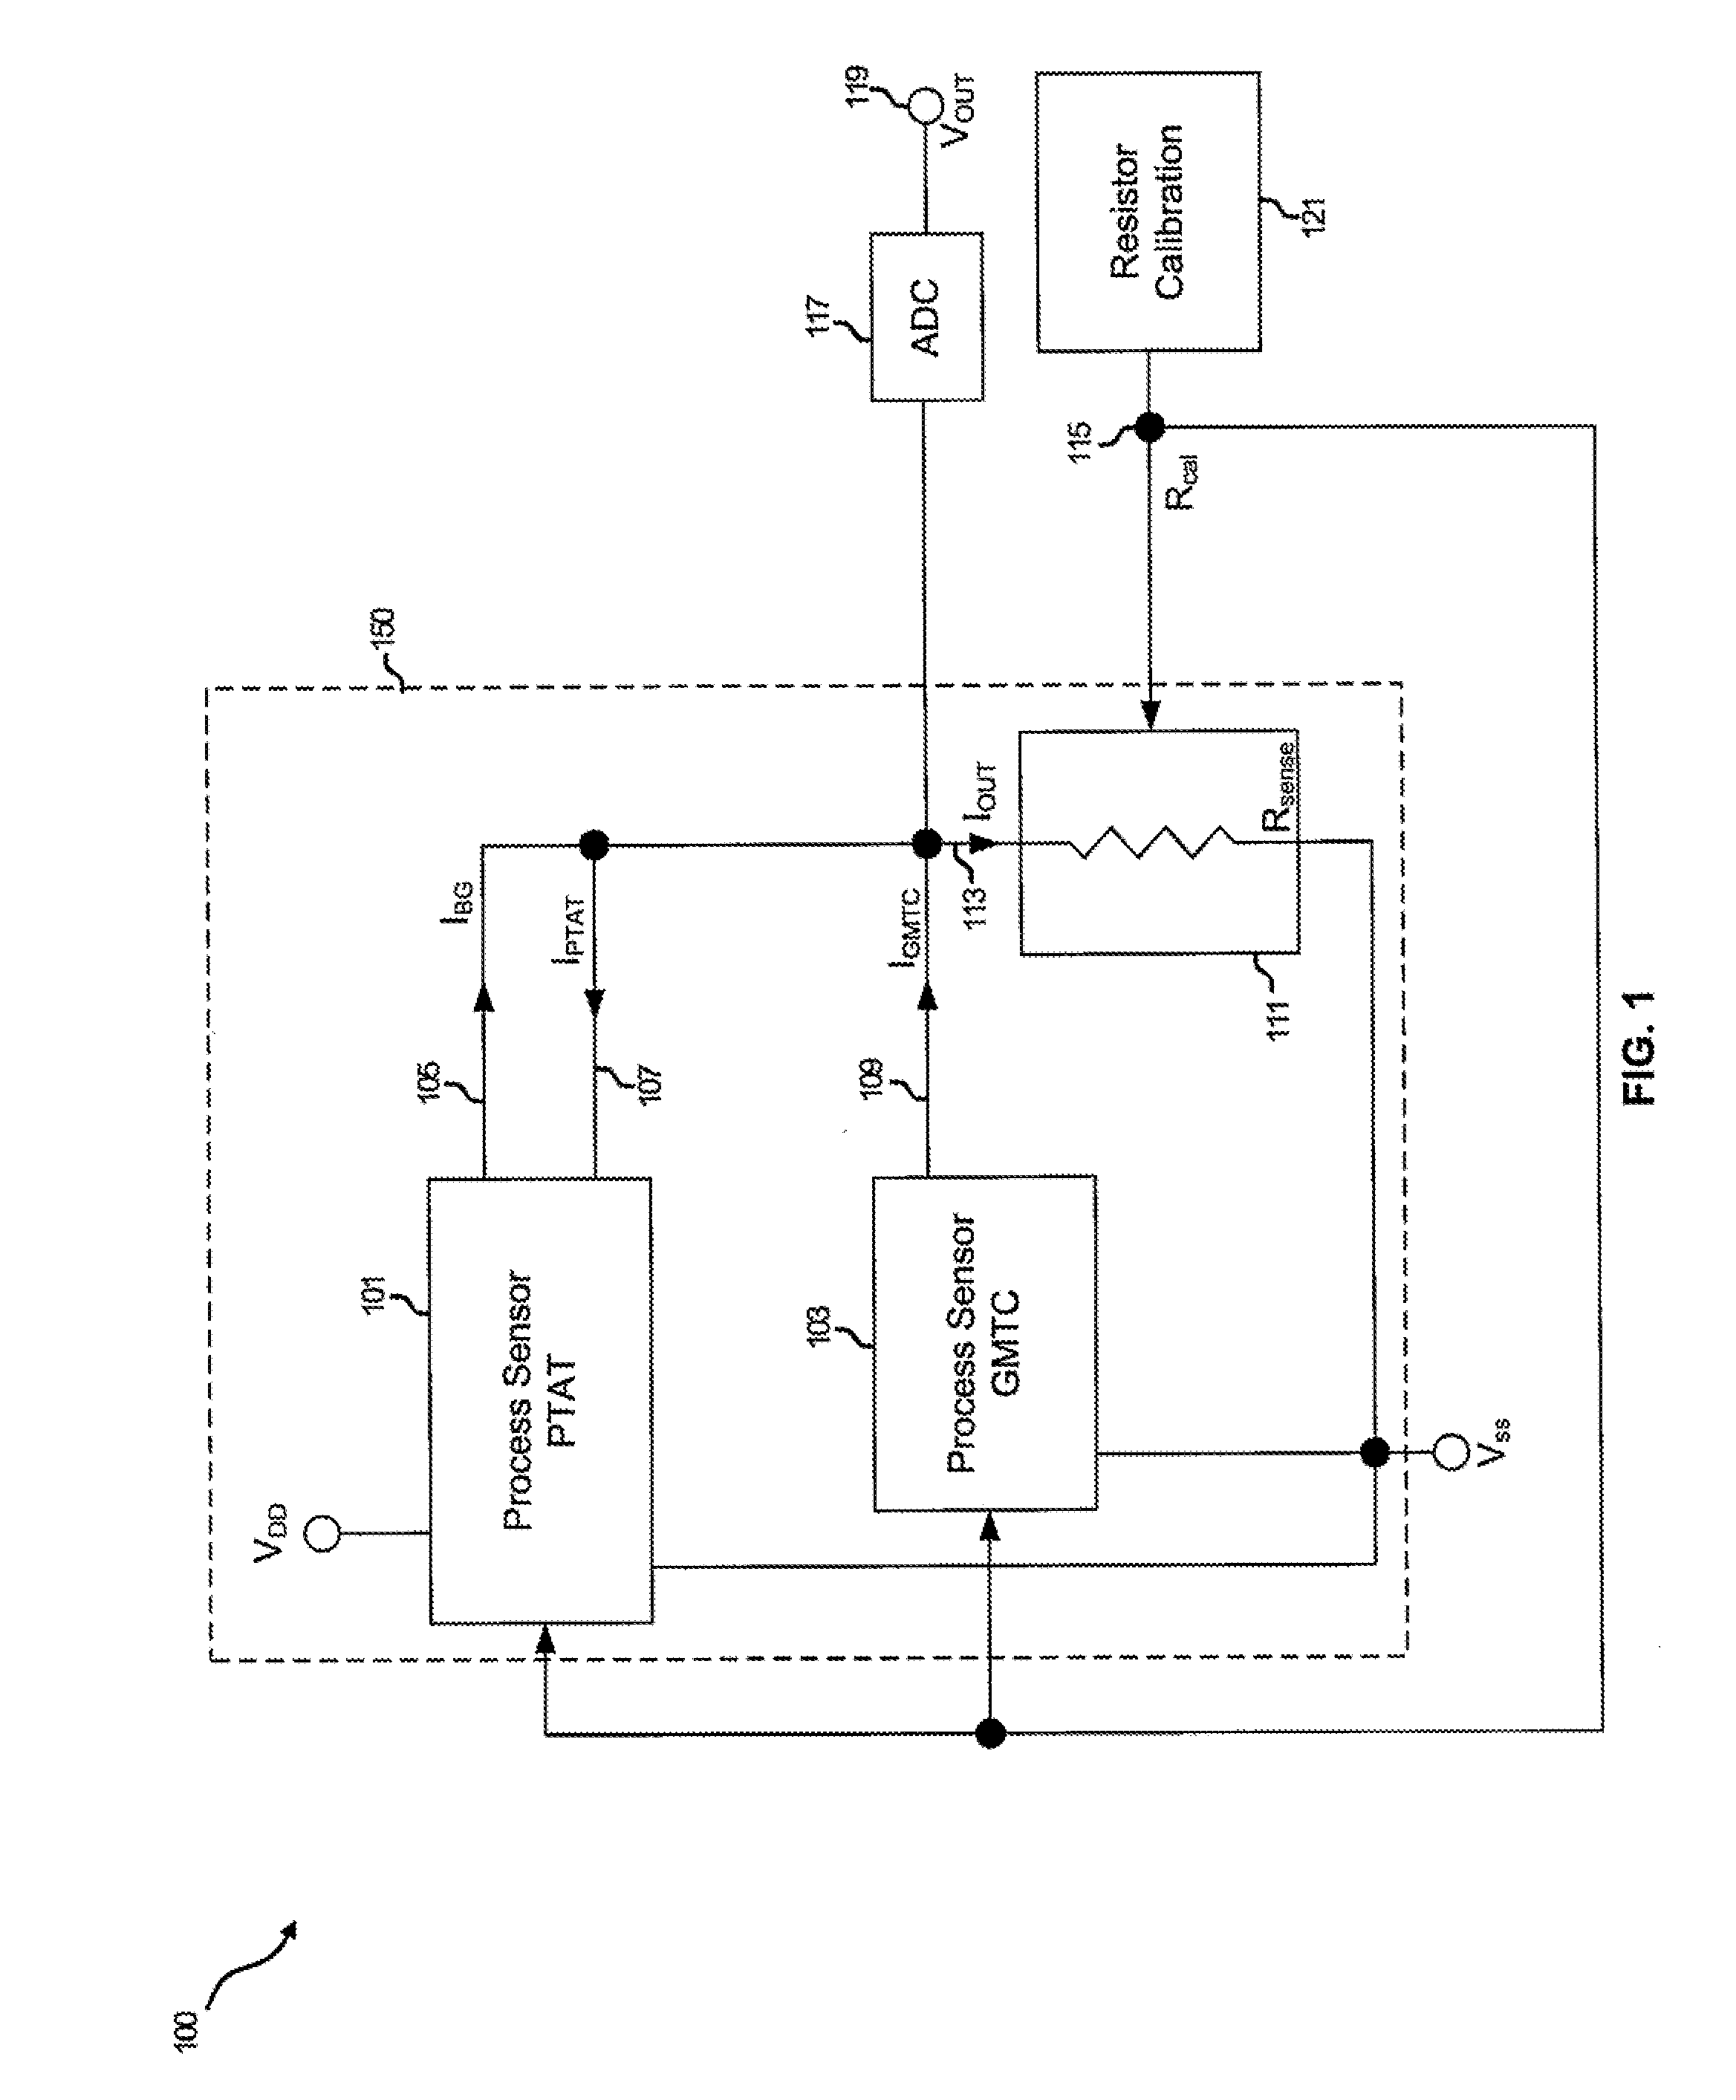 Method and system for a process sensor to compensate soc parameters in the presence of IC process manufacturing variations